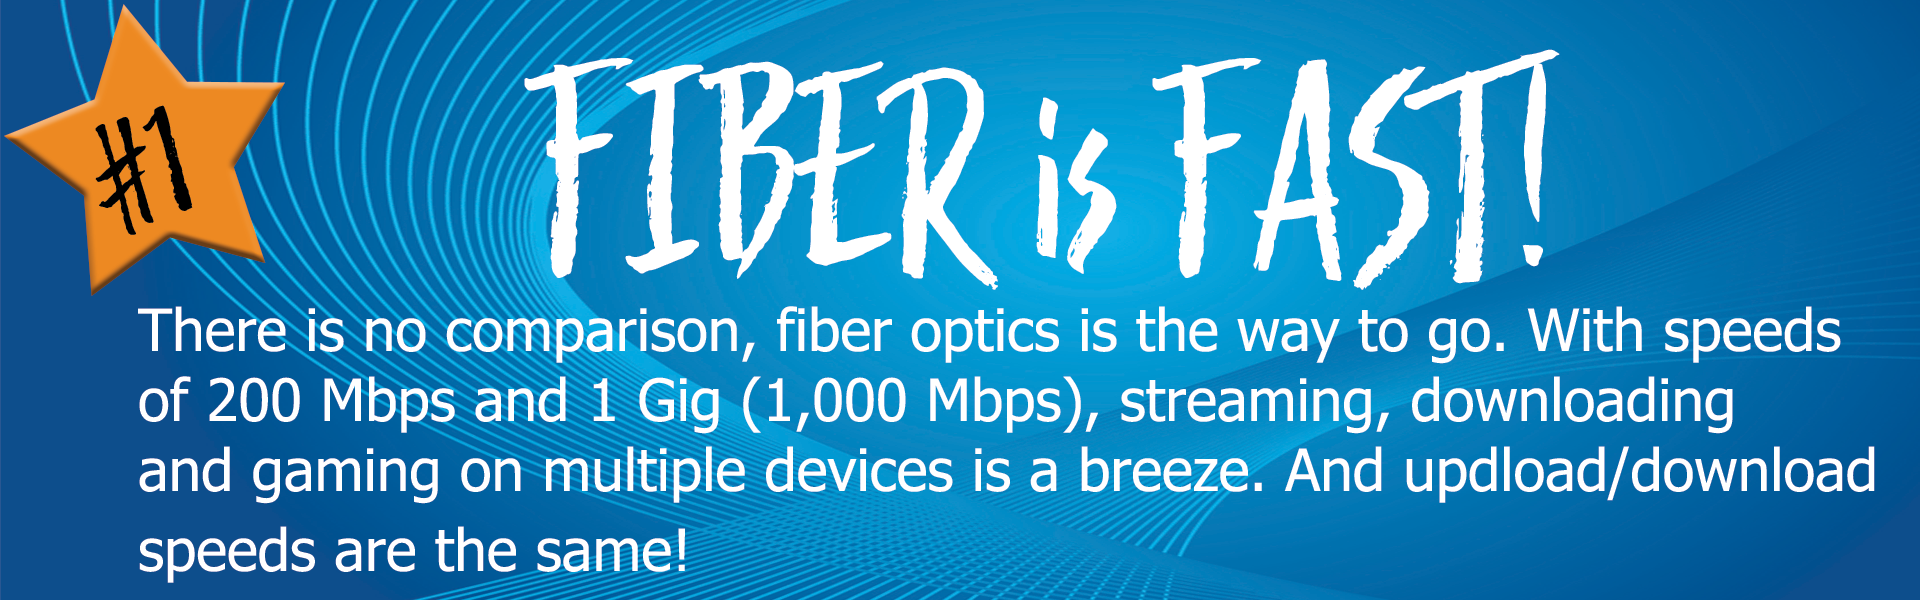 number one reason to connect is fiber is fast